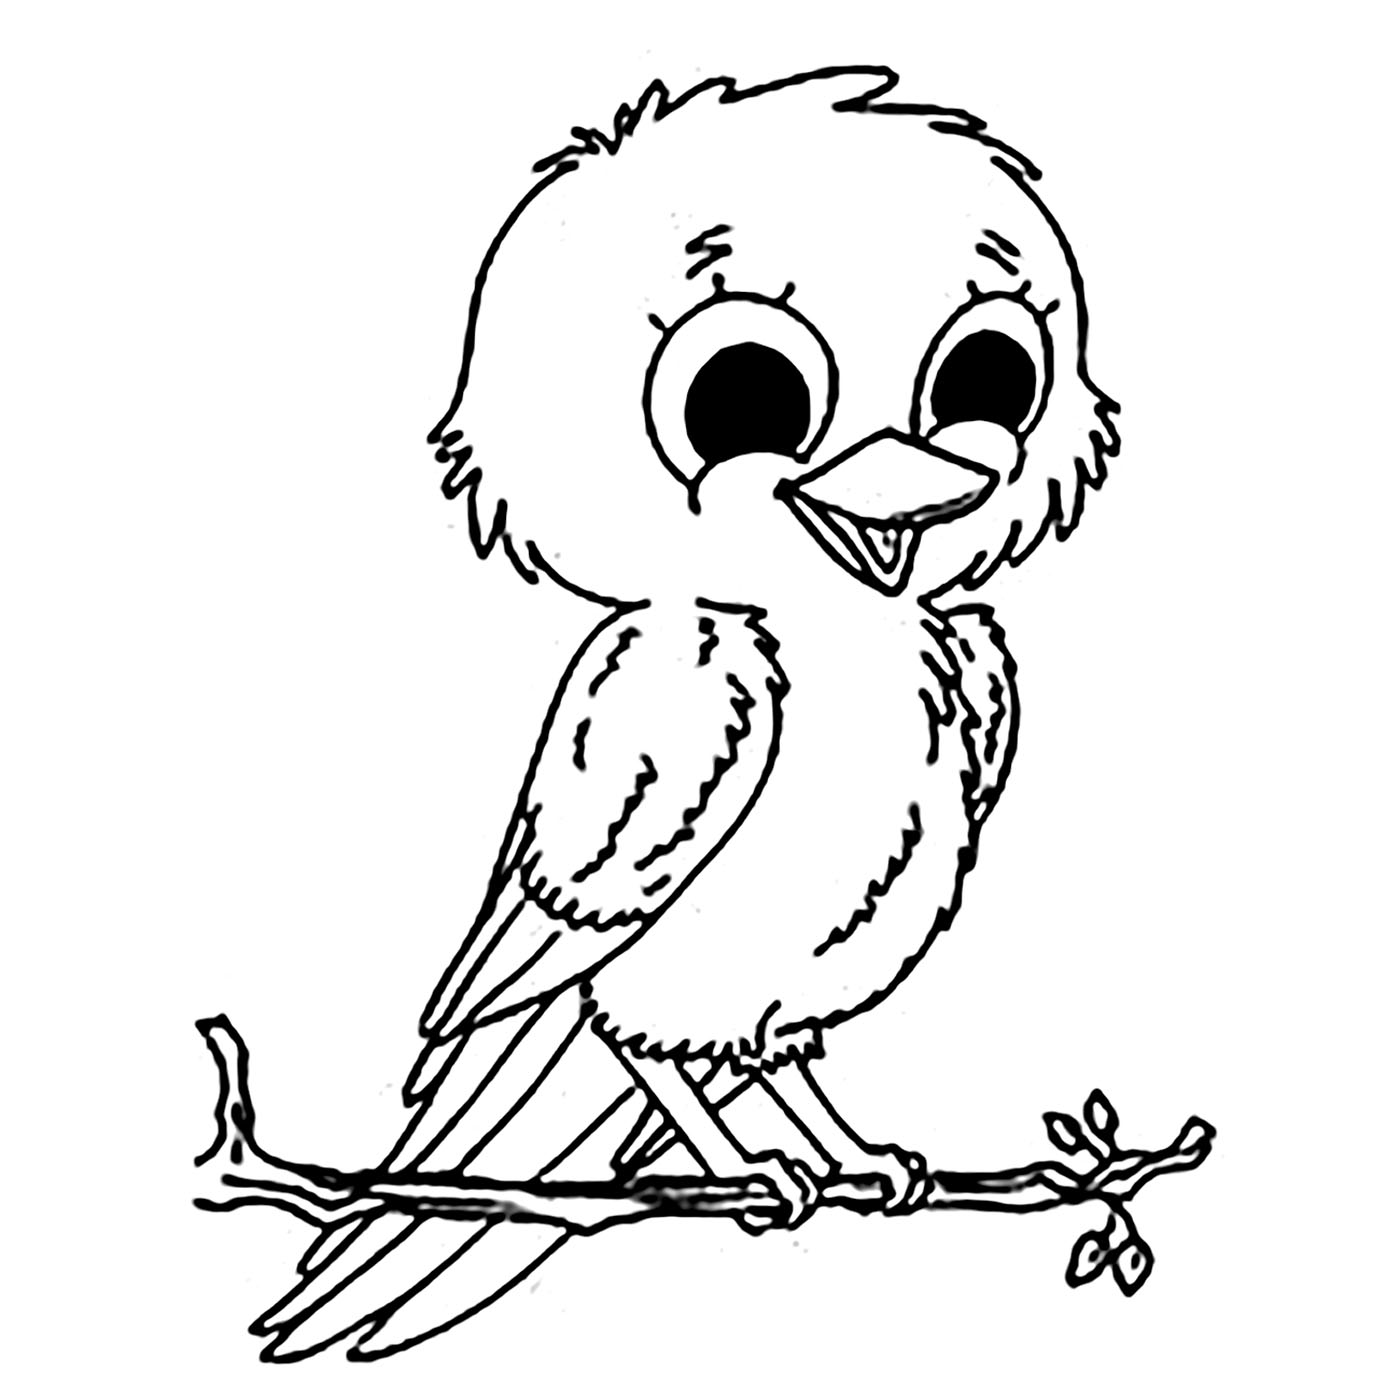 Download Birds for kids - Birds Kids Coloring Pages